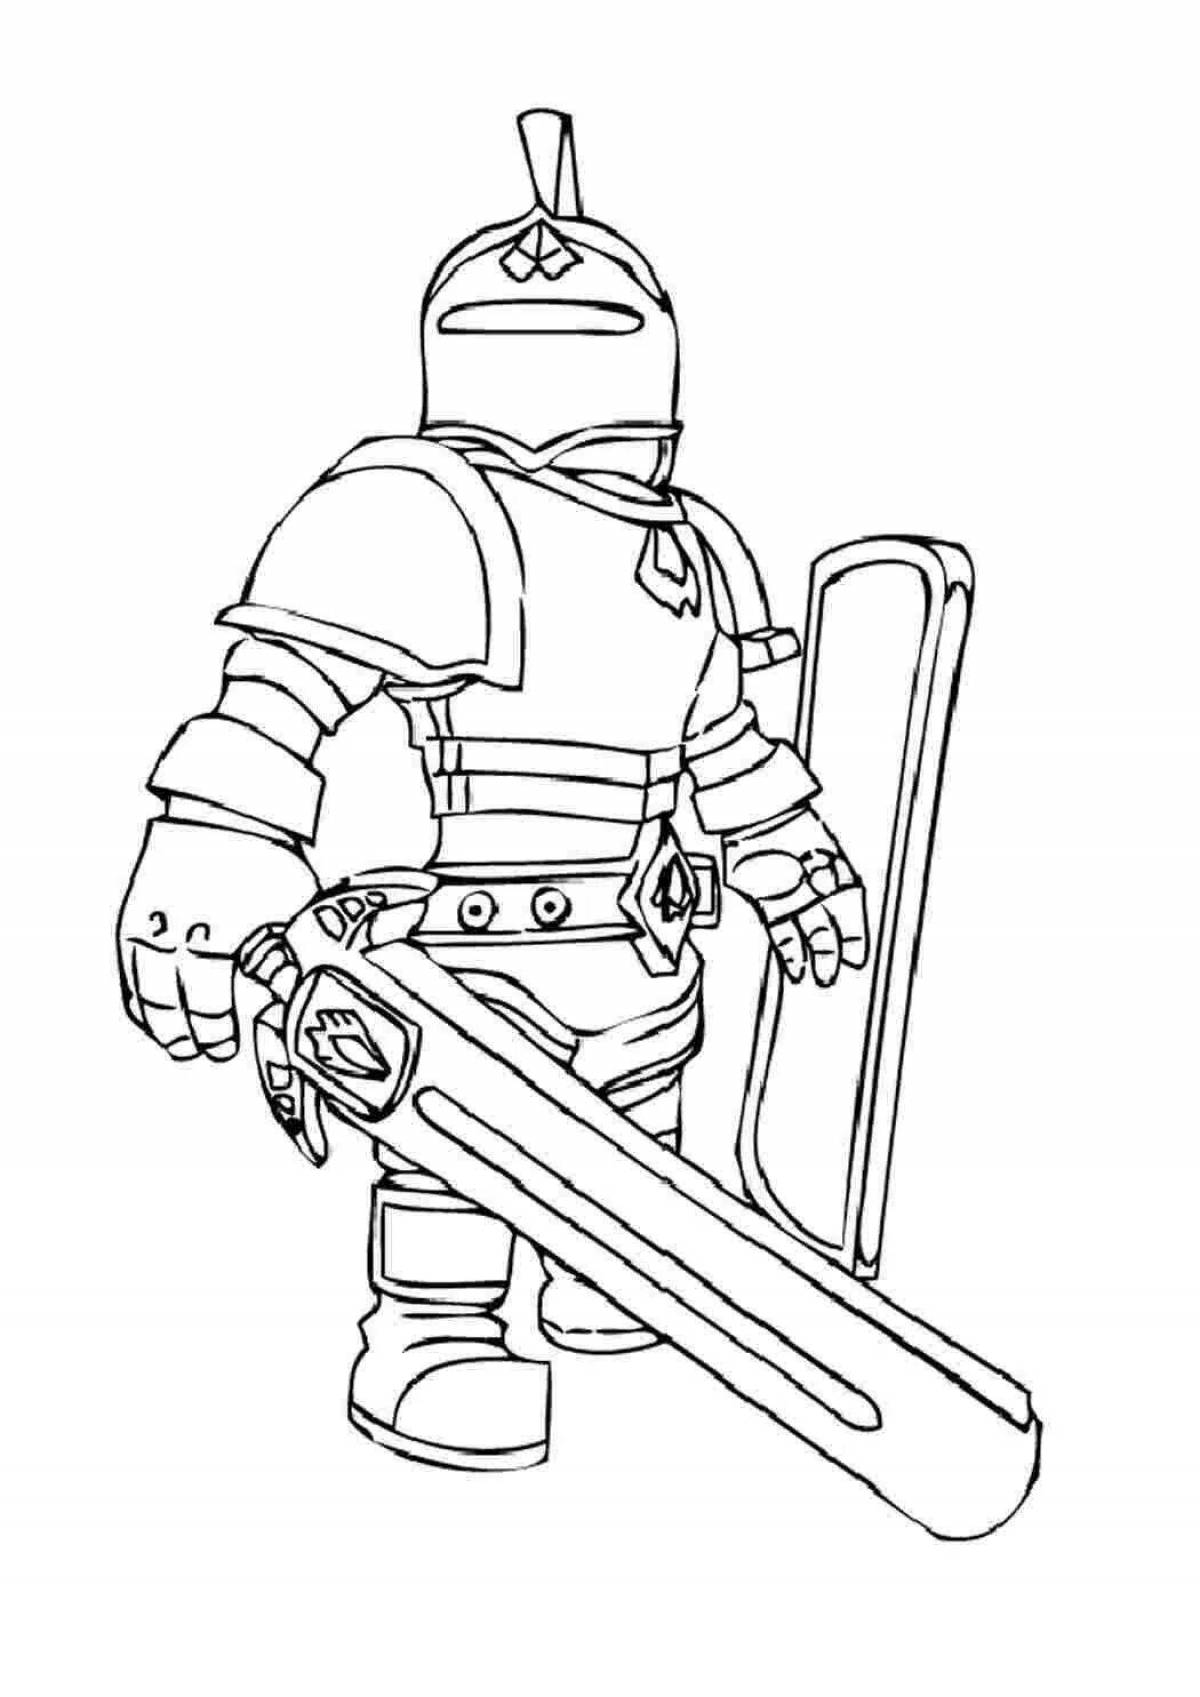 Color-luminous roblox coloring page for boys 10 years old